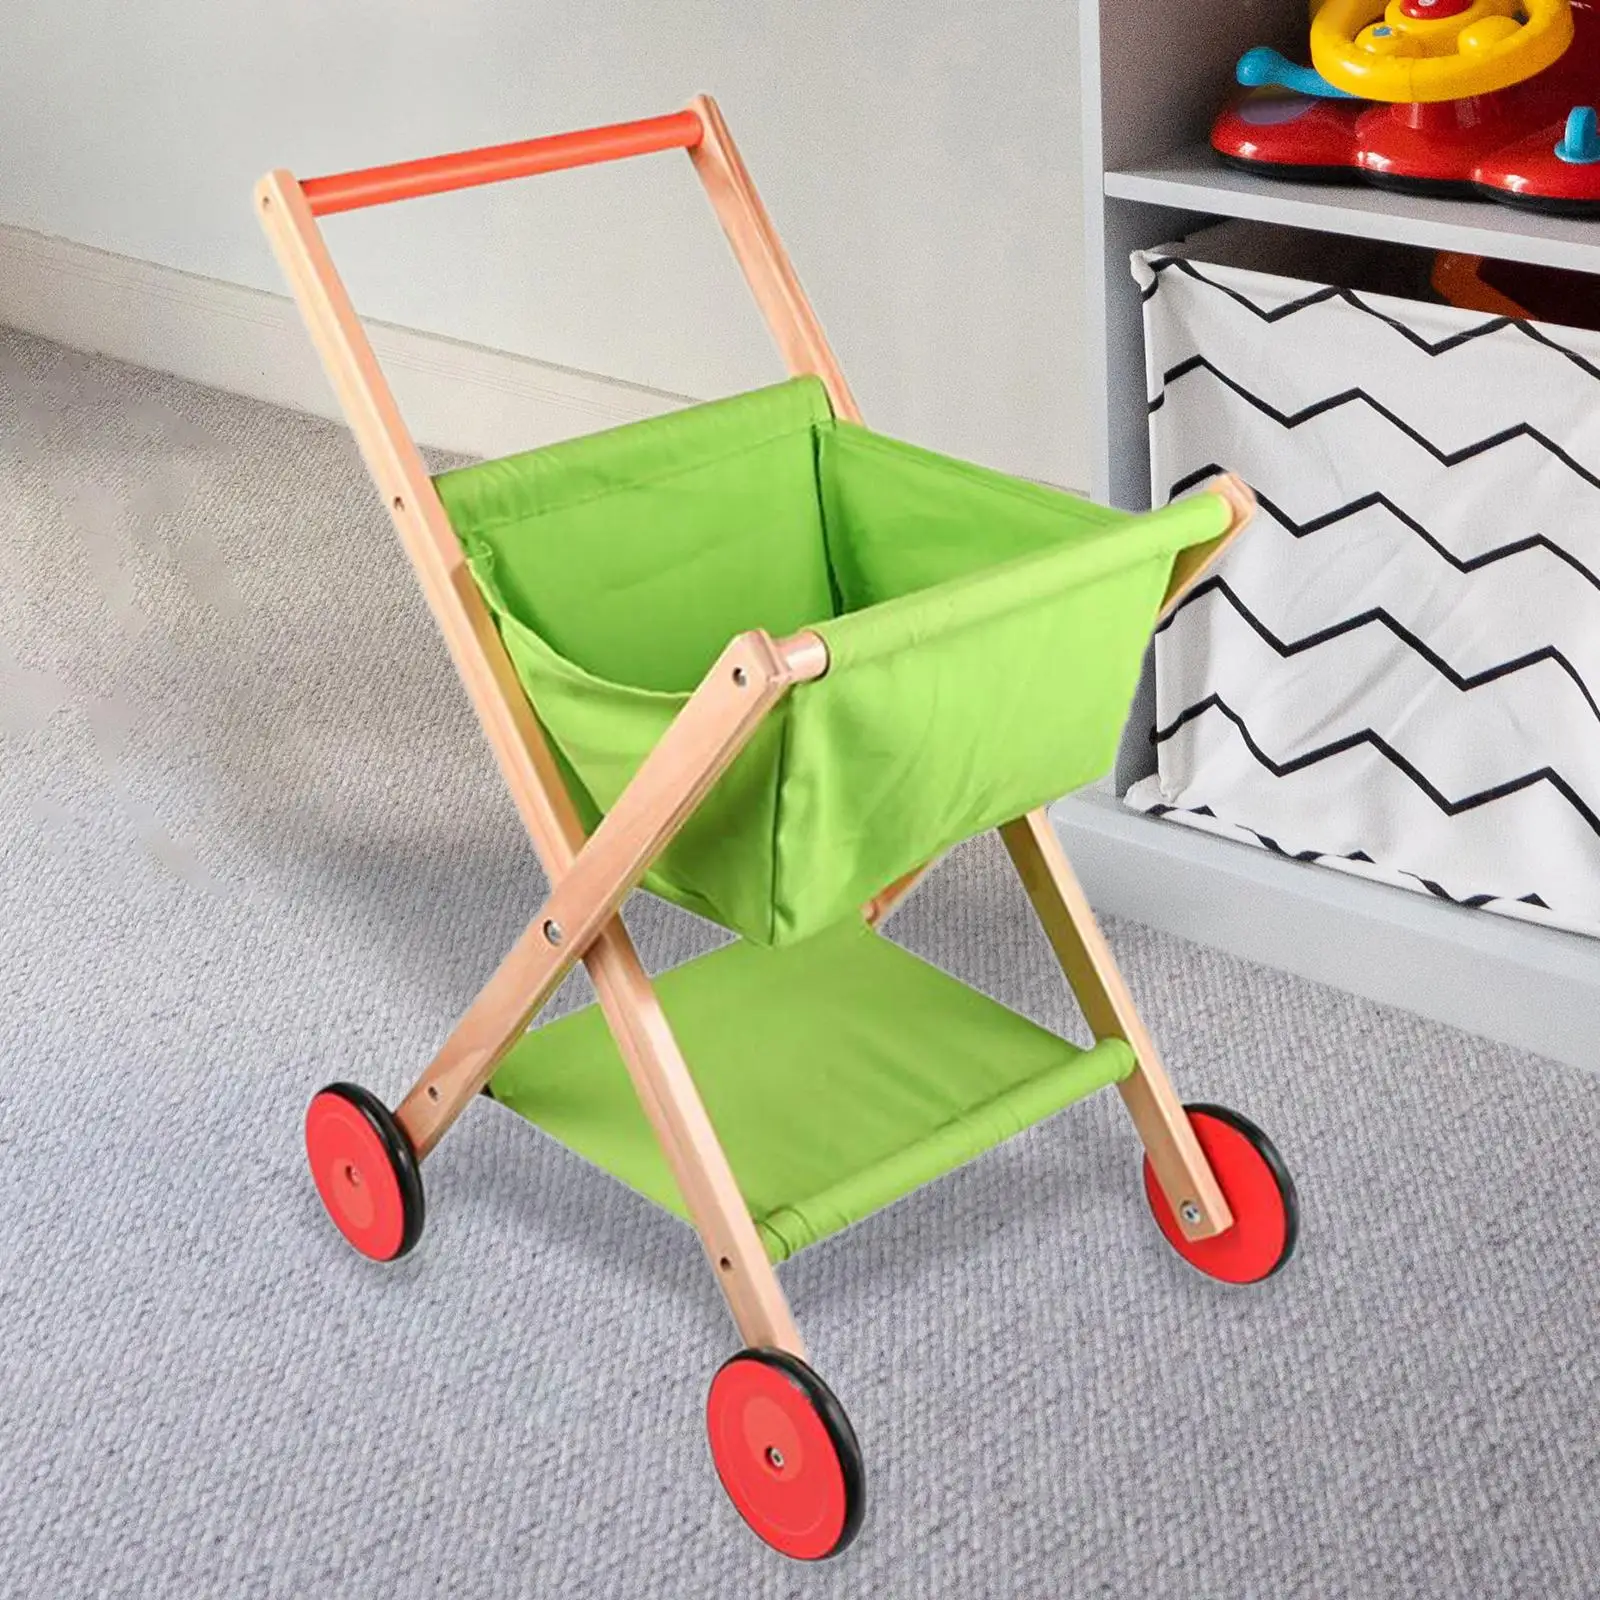 Simulated Wood Shopping Cart House Kitchen Supermarket Toy Grocery Store Shopping Trolley for Girls Boys Kids Birthday Gift